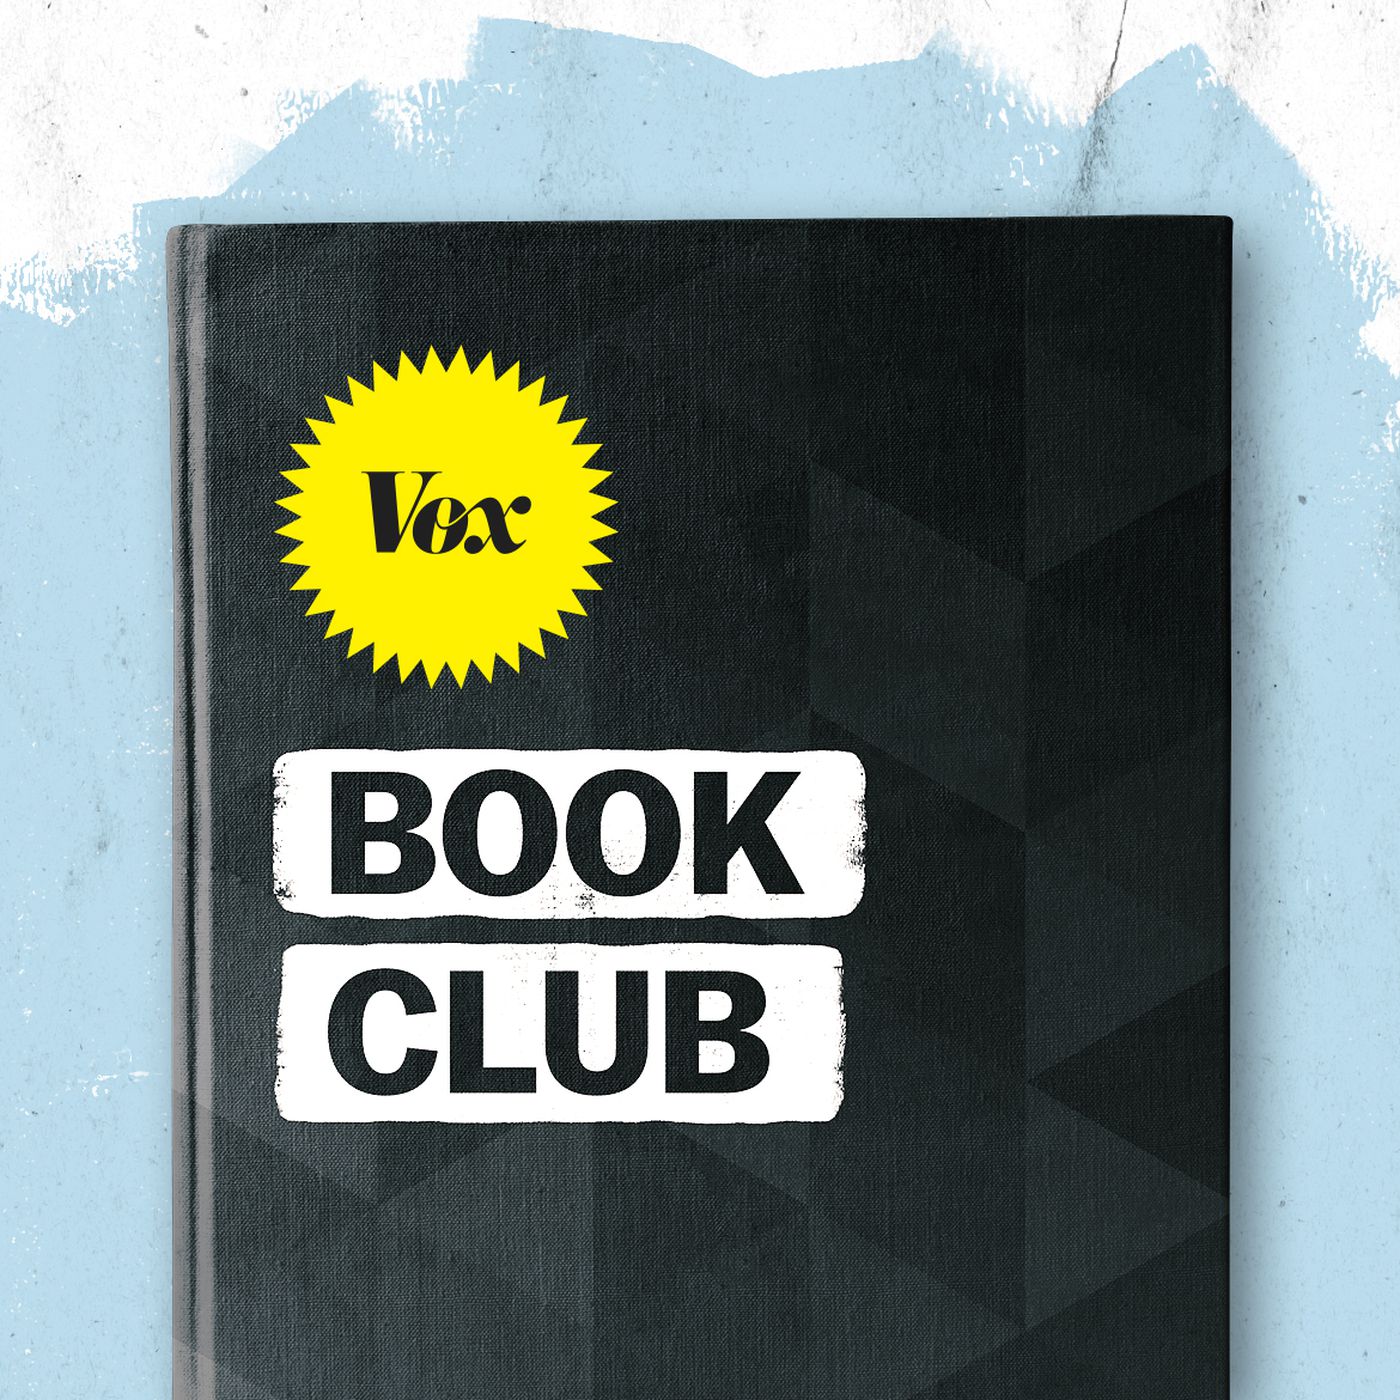 Vox Book Club The Secret History Week 2 How To Cover Up A